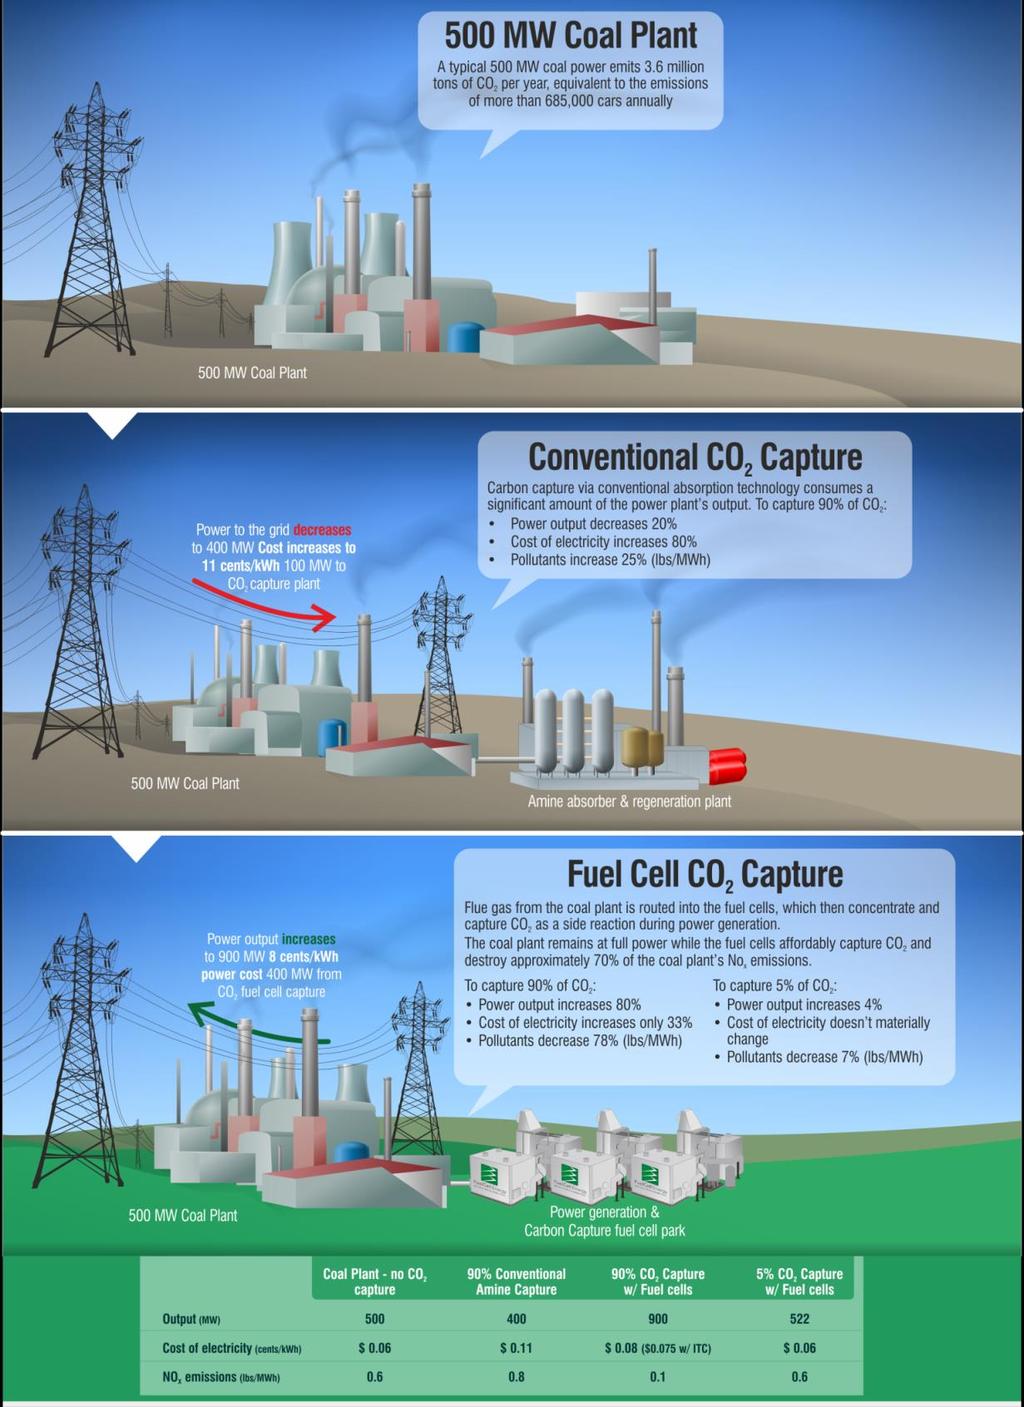 The illustration is based on a design and cost study funded by DOE using a third party engineering company to specify the design and evaluate the cost of large scale SureSource-based systems for